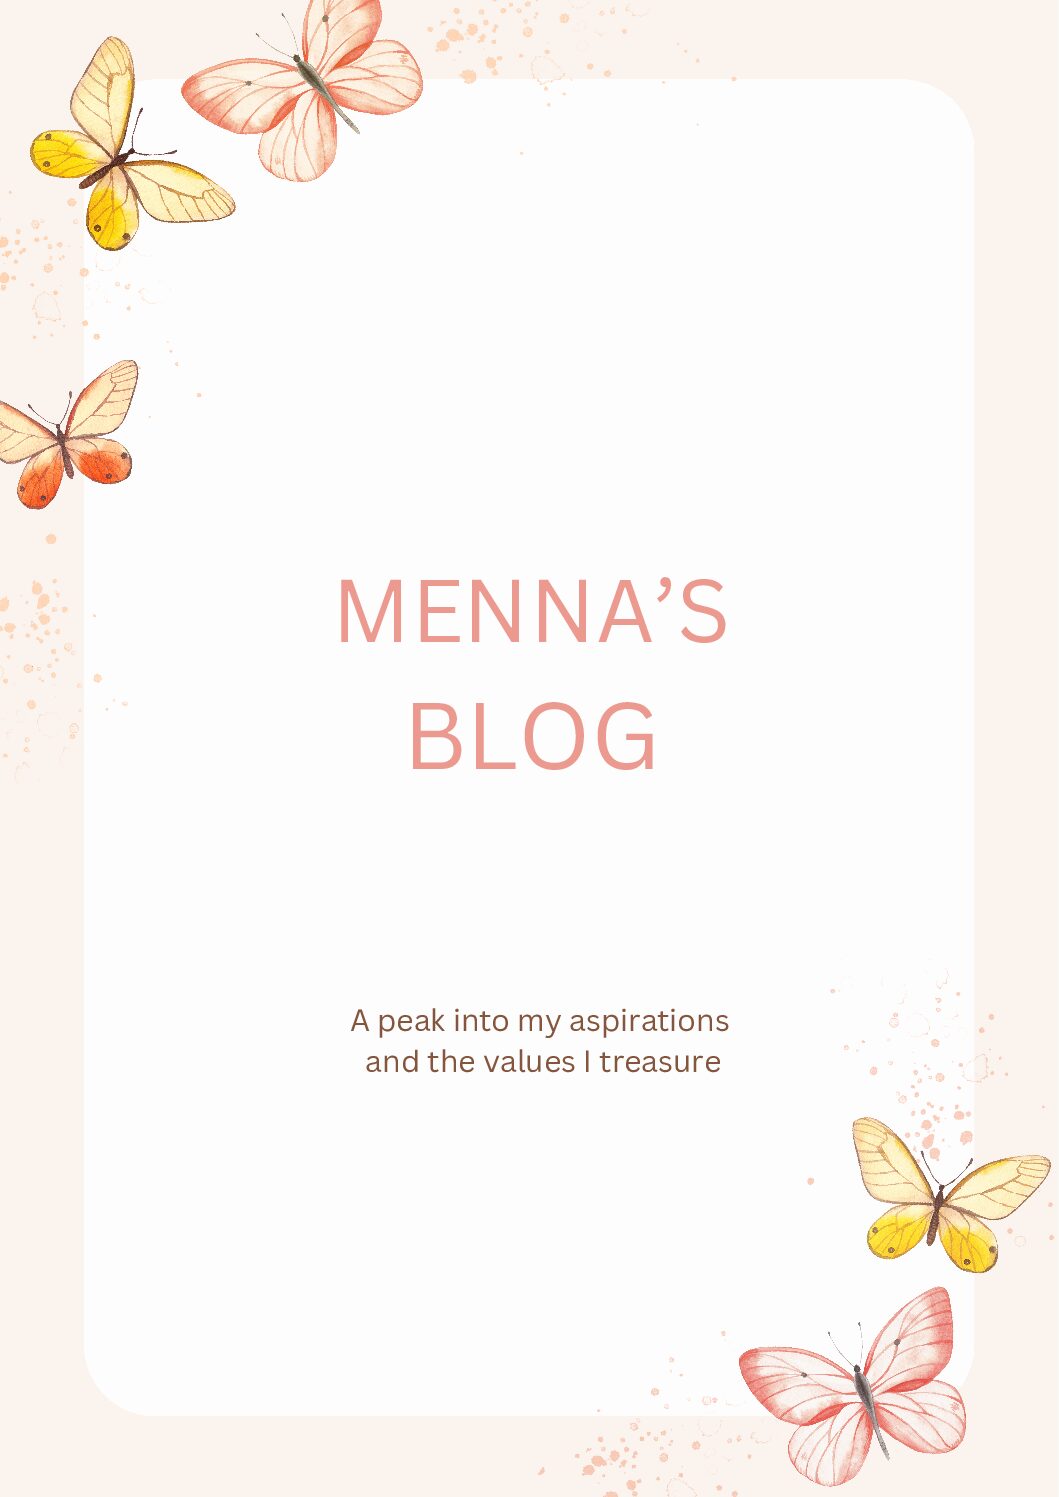 A picture with my name in the title : Menna's Blog. And the sentence: a peak in to my aspirations and the values I treasure. The borders have pink, orange, and yellow butterflies and the whole canvas is cream colored.